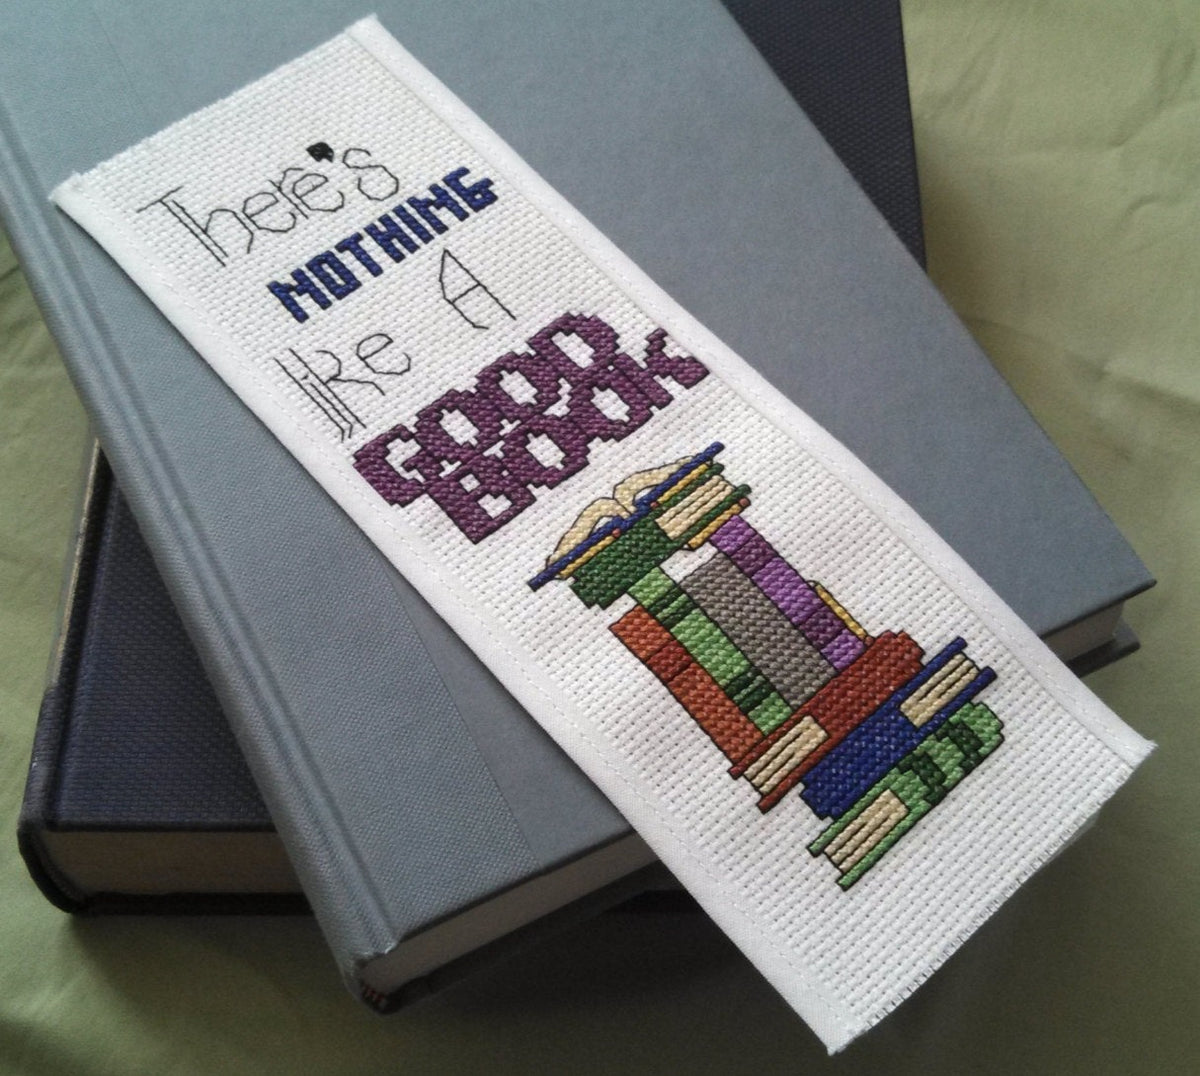 Funny Book Lover Cross Stitch Patter It's Not Hoarding If It's